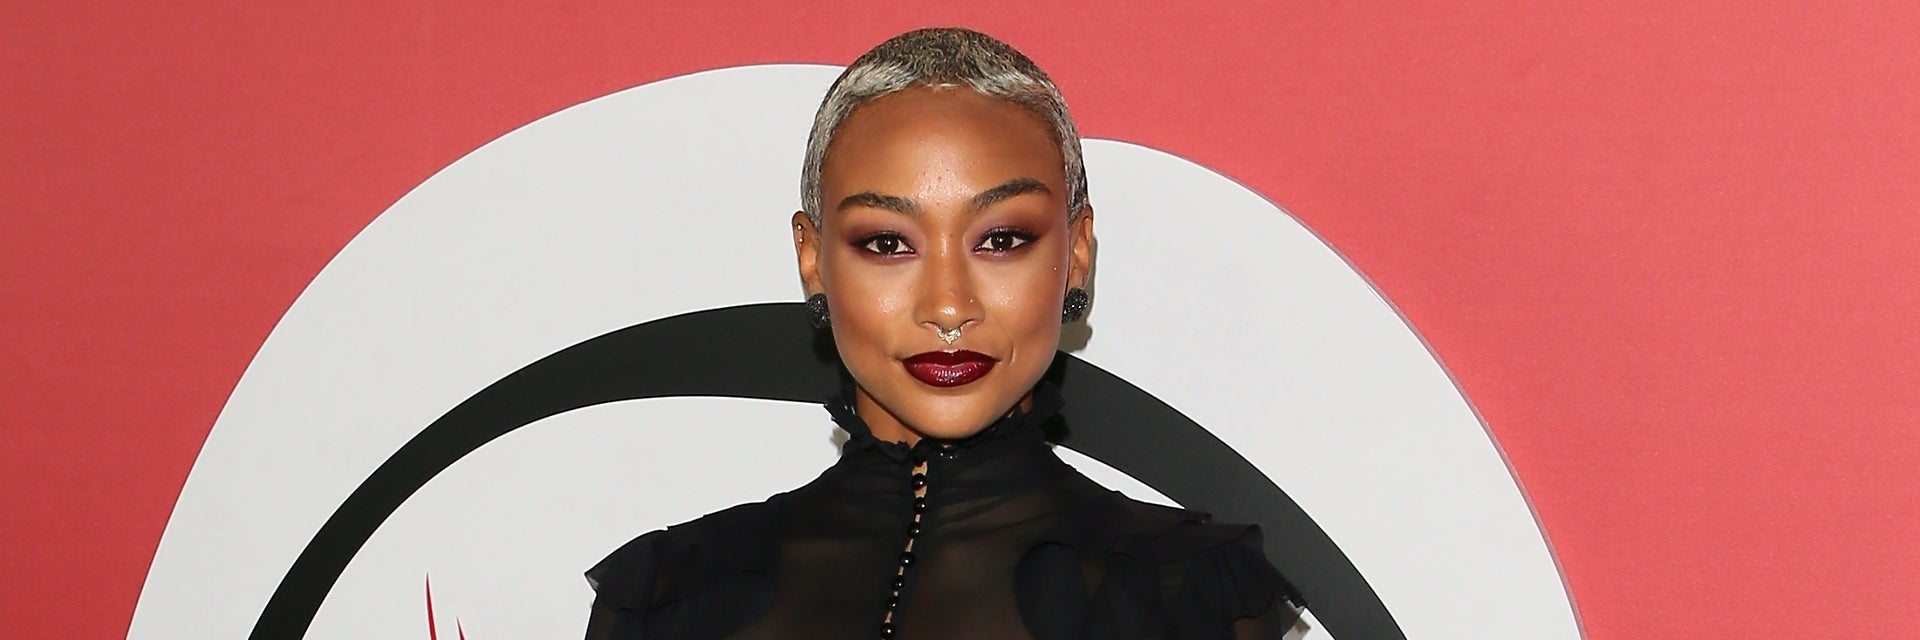 Tati Gabrielle — You And Chilling Adventures Of Sabrina Actor — Shared  That She Grew Up With Zendaya, And Now I Absolutely Need The Two Of Them In  A Project Together